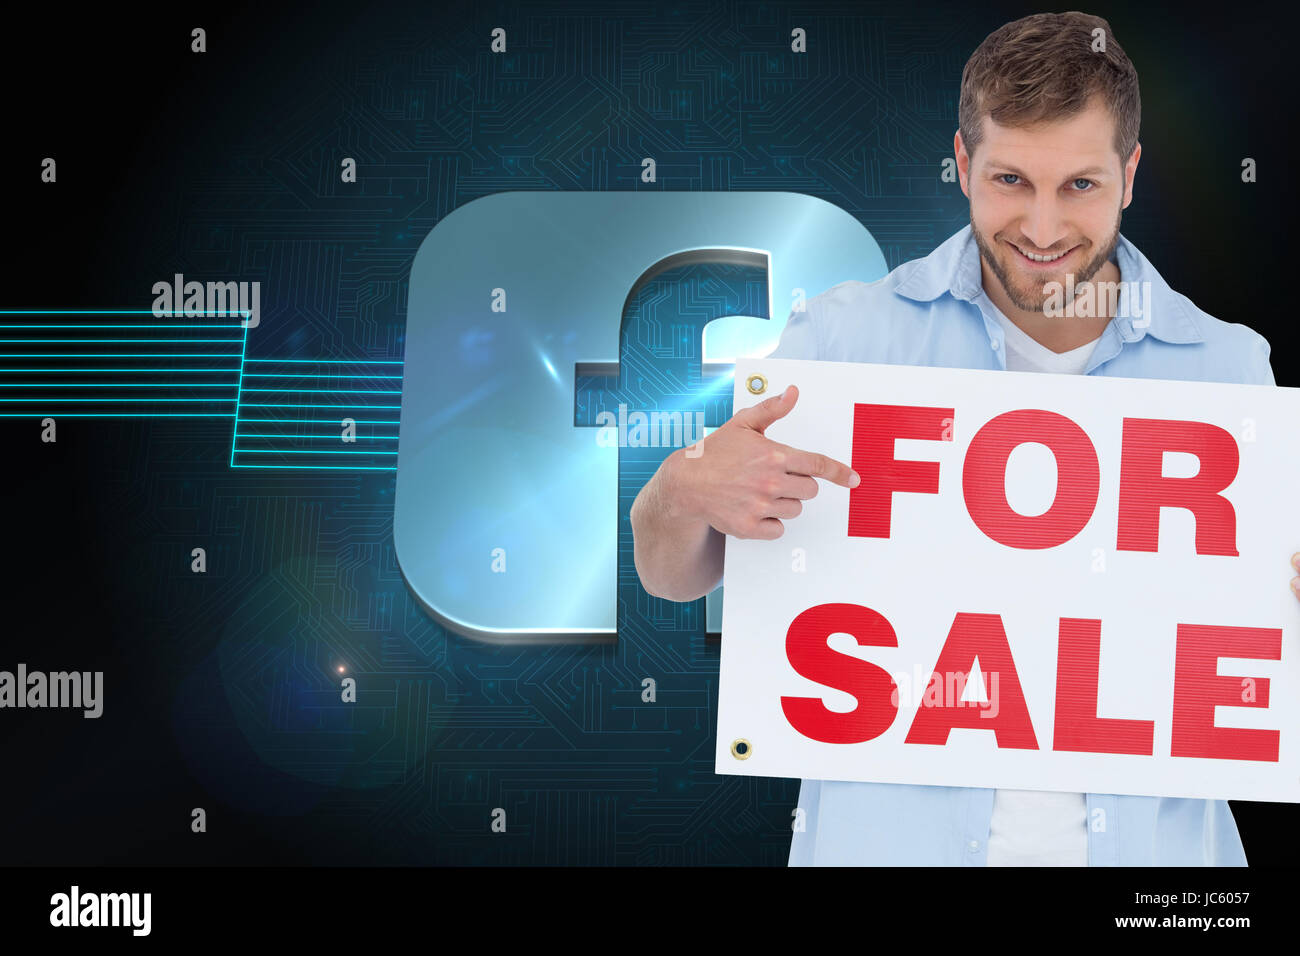 Composite image of model holding a for sale sign Banque D'Images